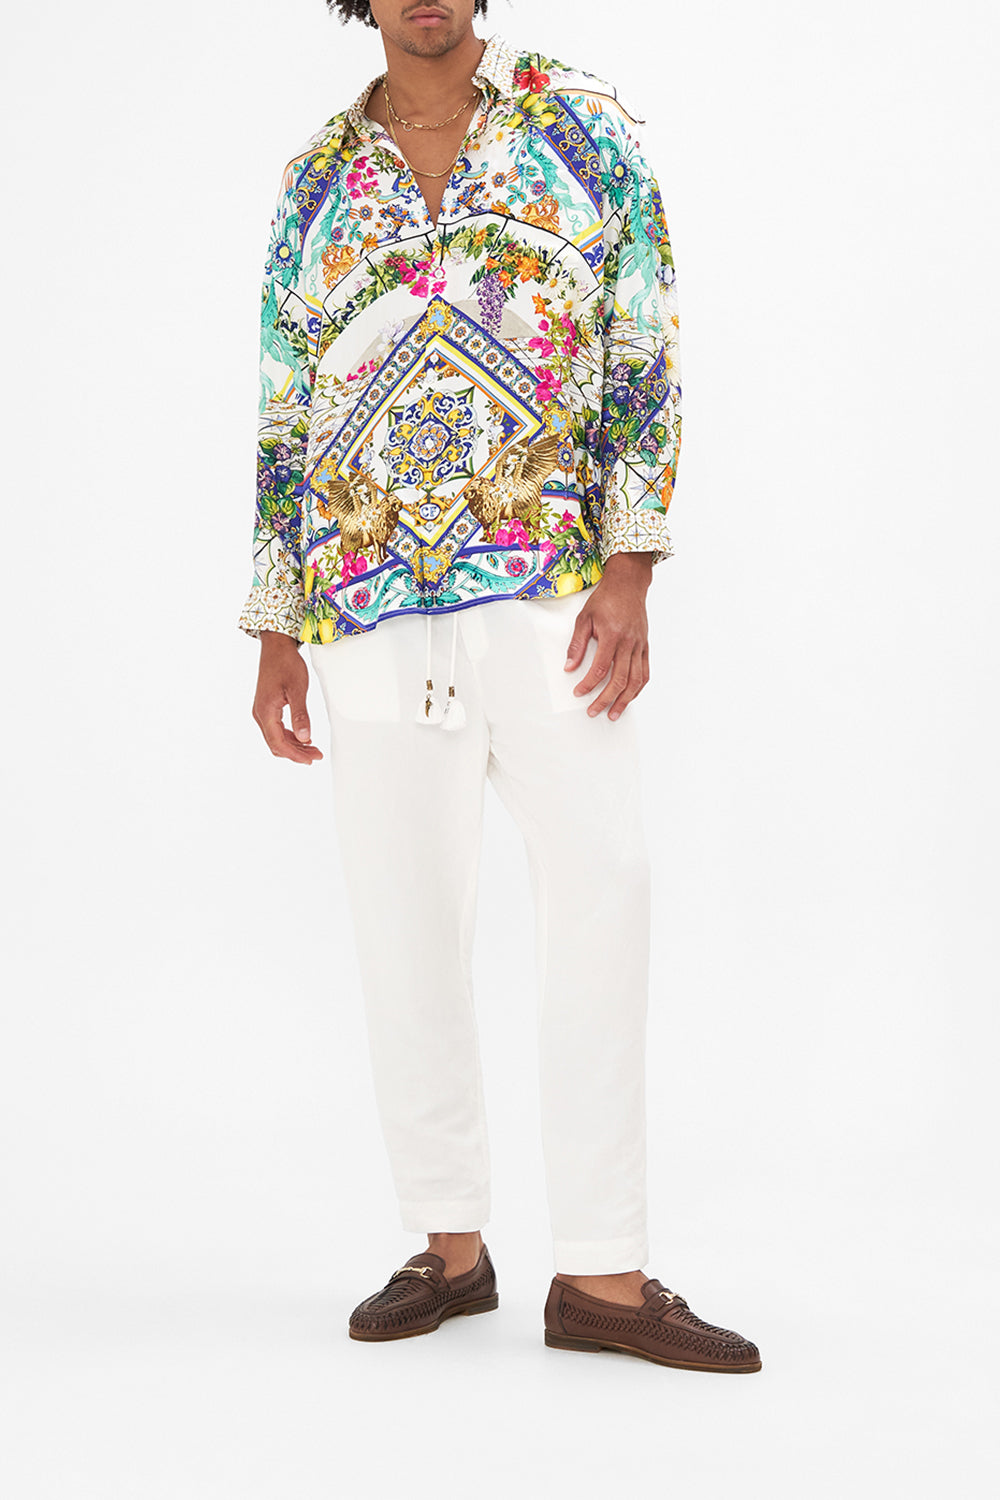 Front view of model wearing HOTEL FRANKS BY CAMILLA mens oversized shirt in Amalfi Amore print